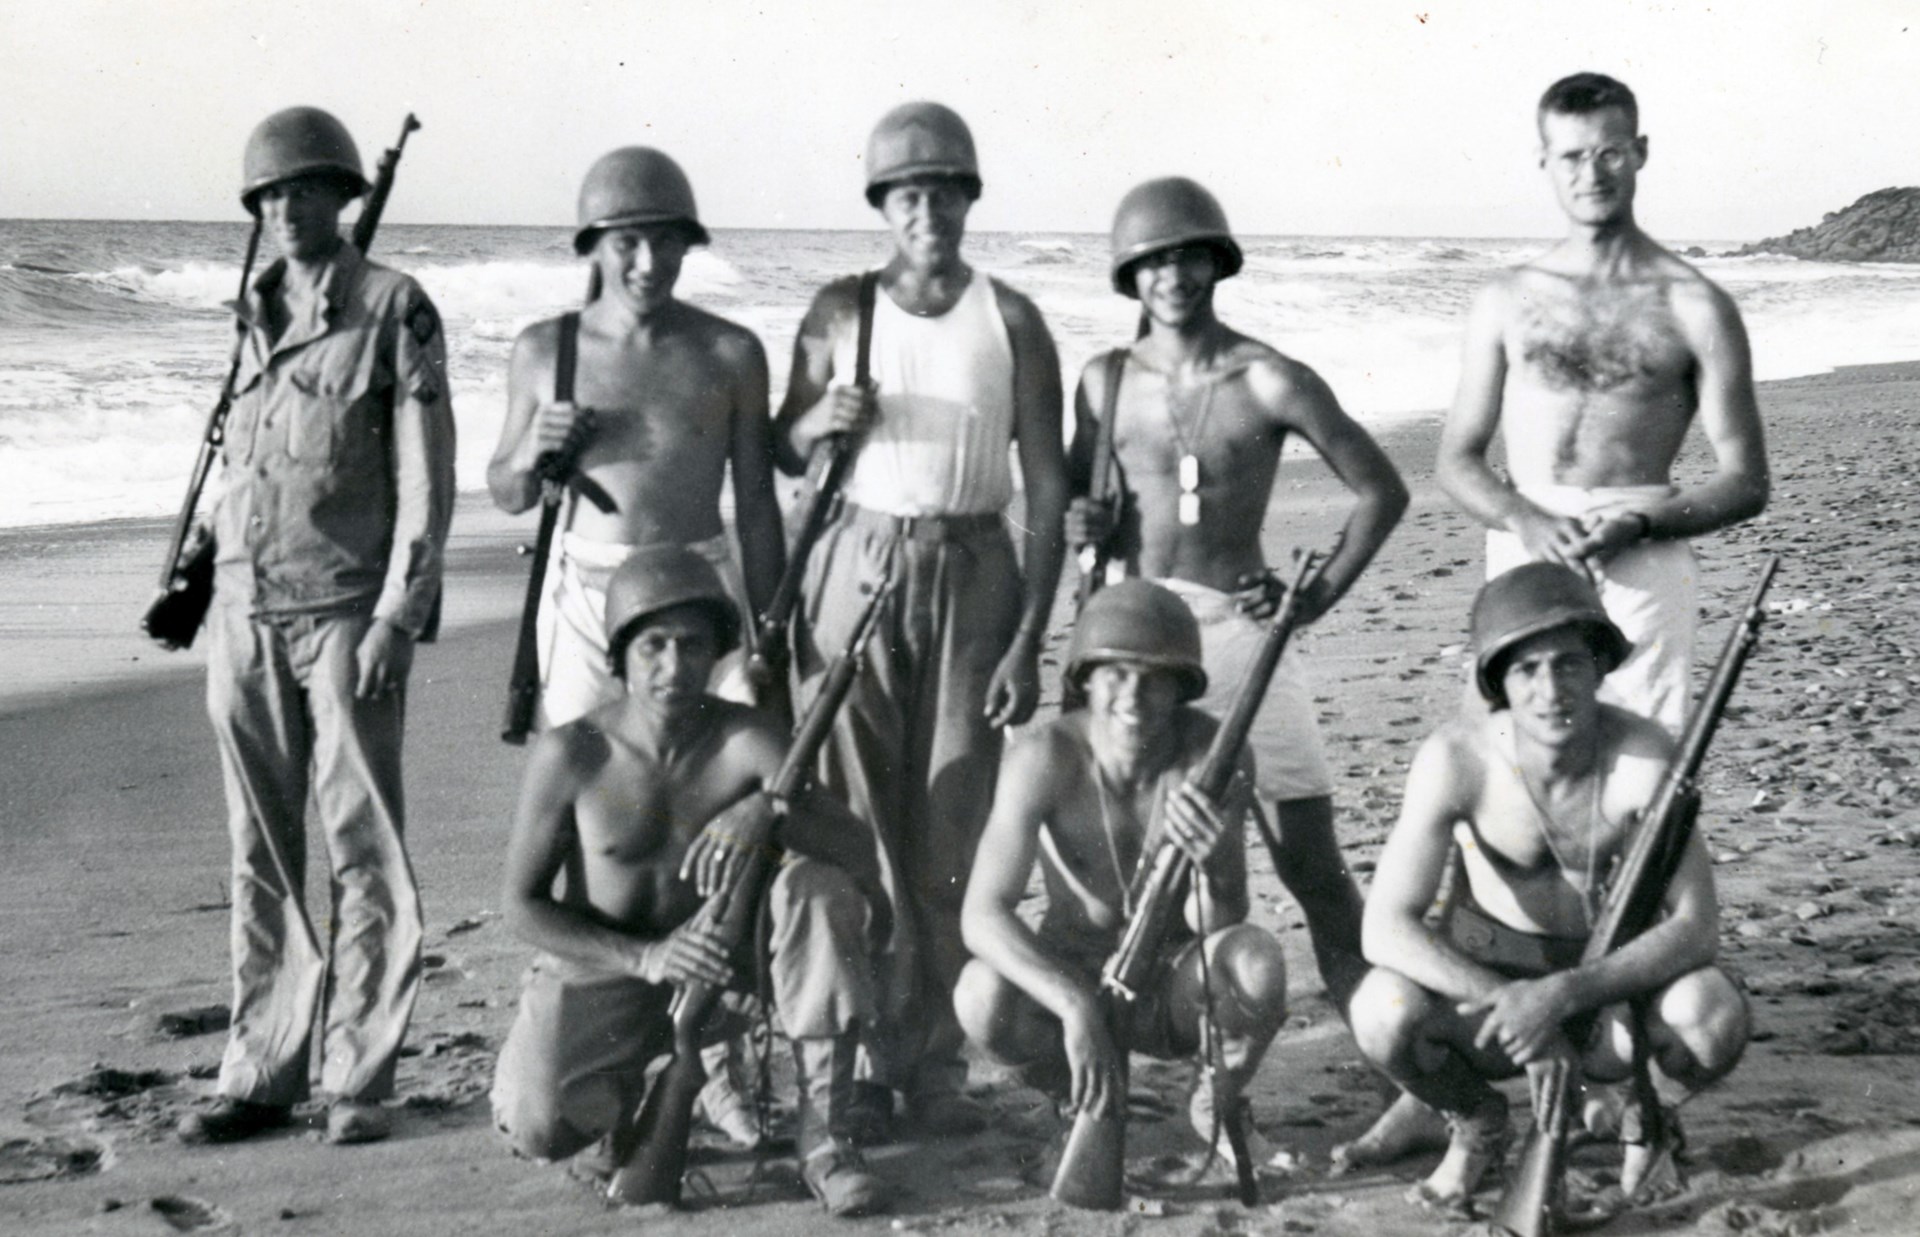 Enjoying the sun and surf on a Sicilian beach, these GIs carry a mix of M1 Garand and M1903 Springfield rifles. Author’s collection